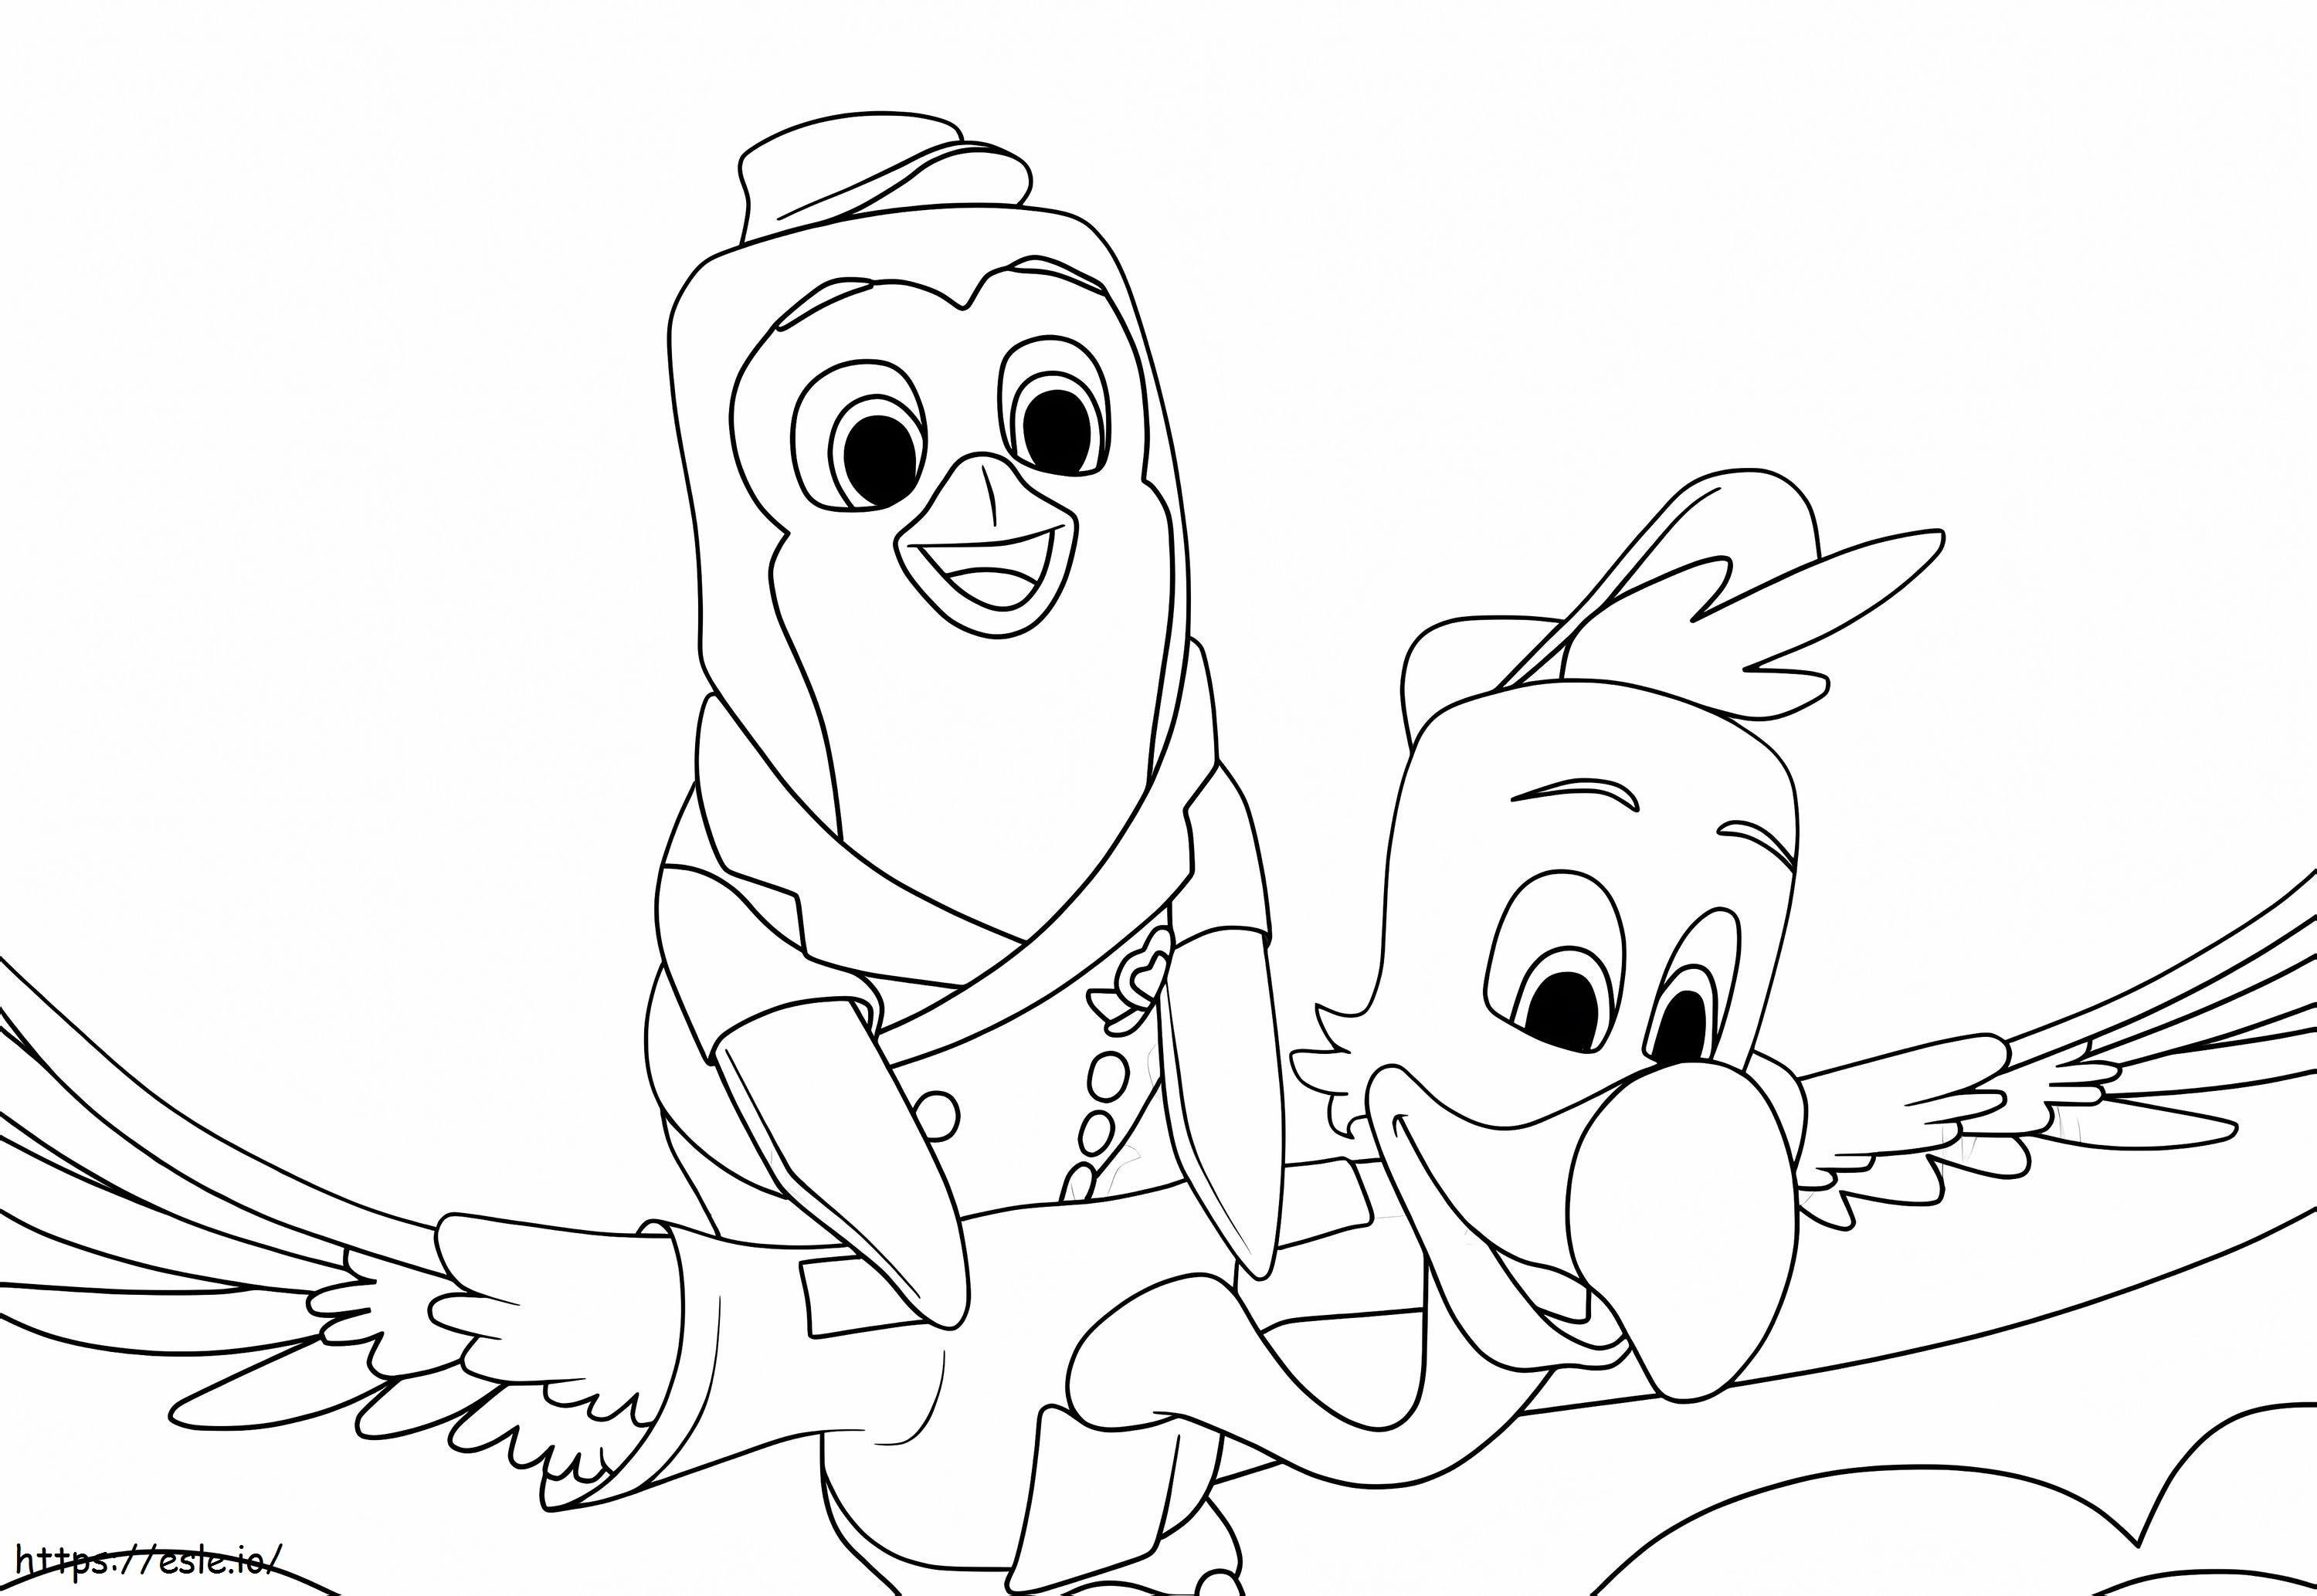 Freddy With Pip coloring page